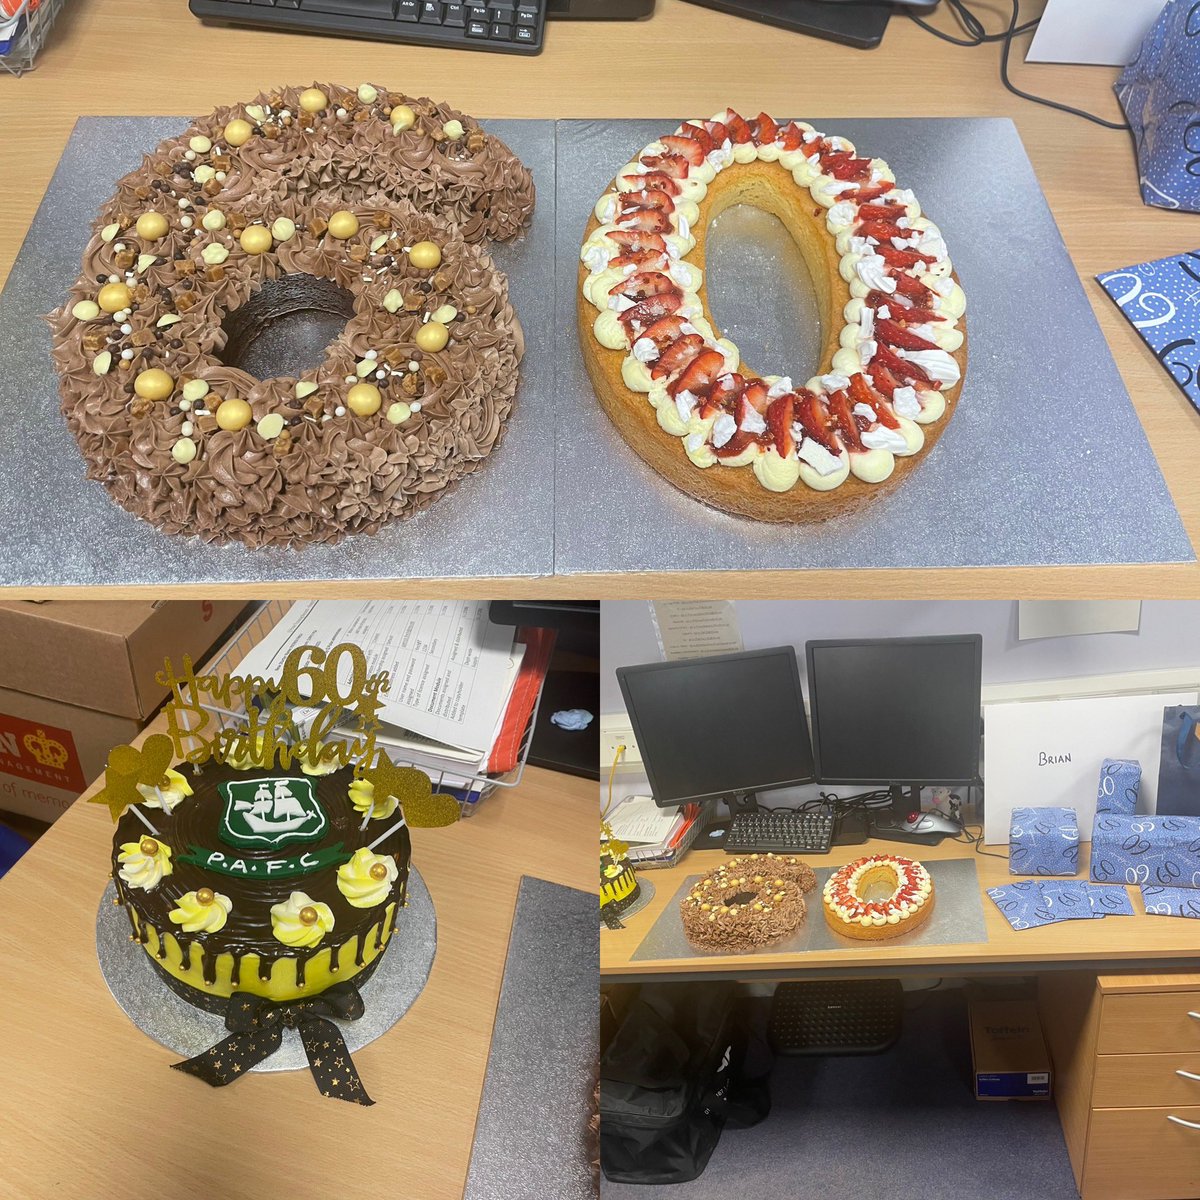 Pharmacy know how to celebrate a birthday! Happy birthday to our lovely Education & Training Lead Brian! 🥳🥳 @uhppharmacy